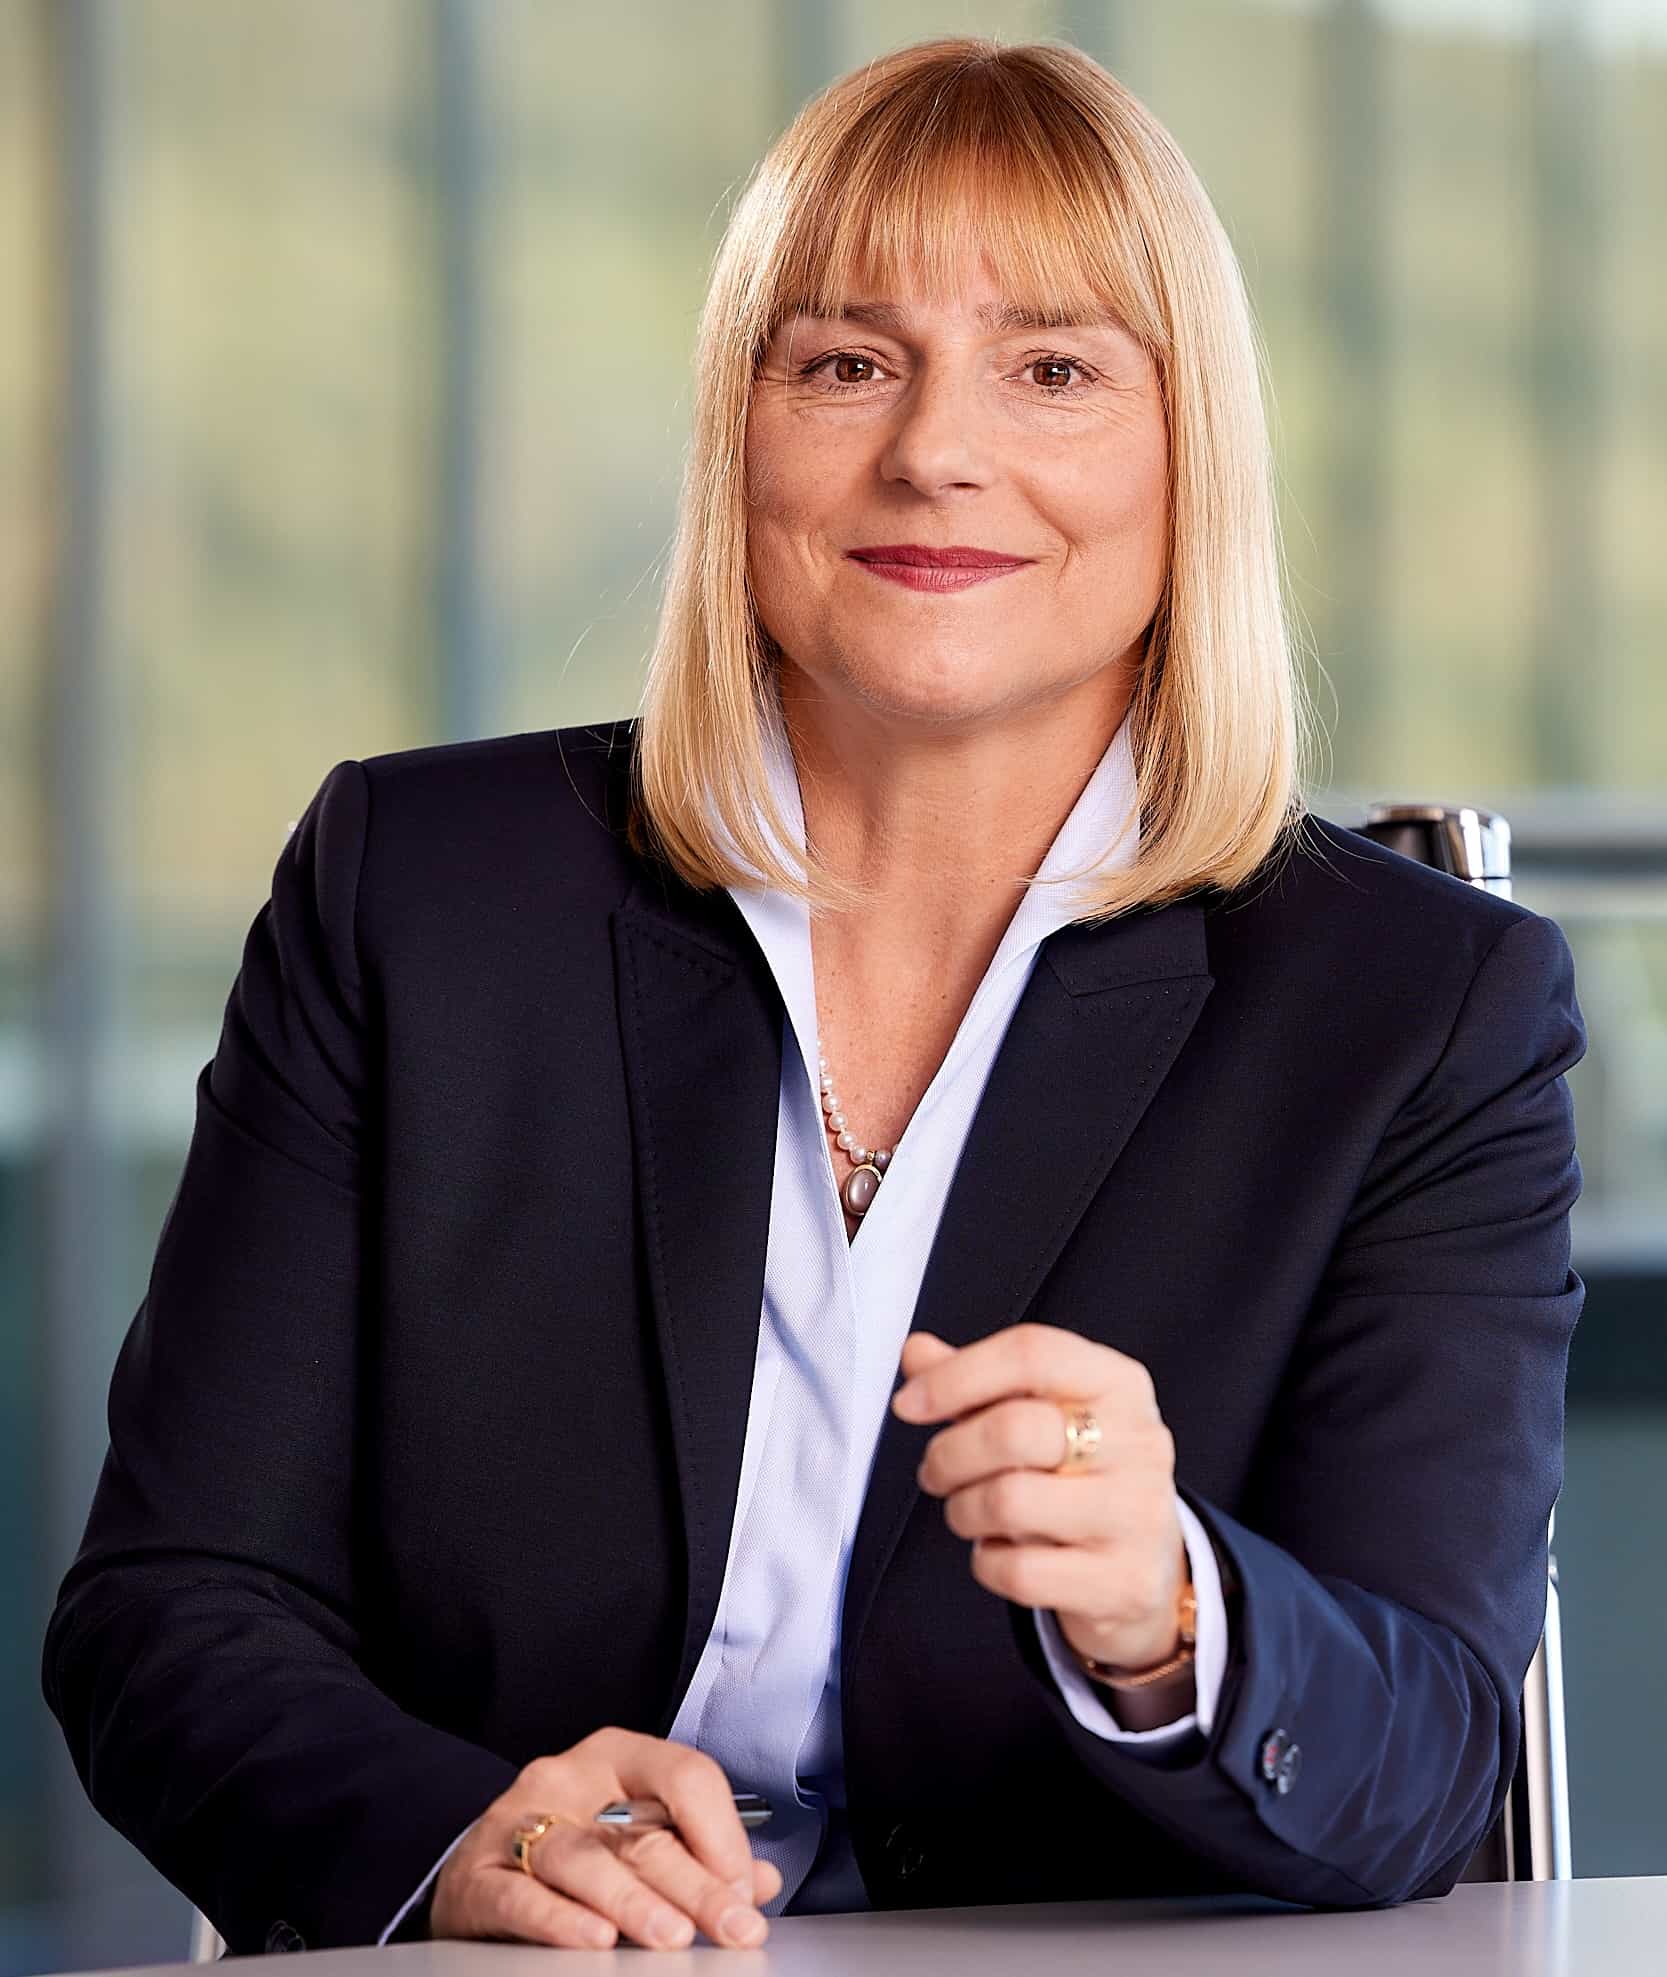 Ms. Andrea Bussmann, Group Managing Director of Marketing, Sales, and Product Management at Schell